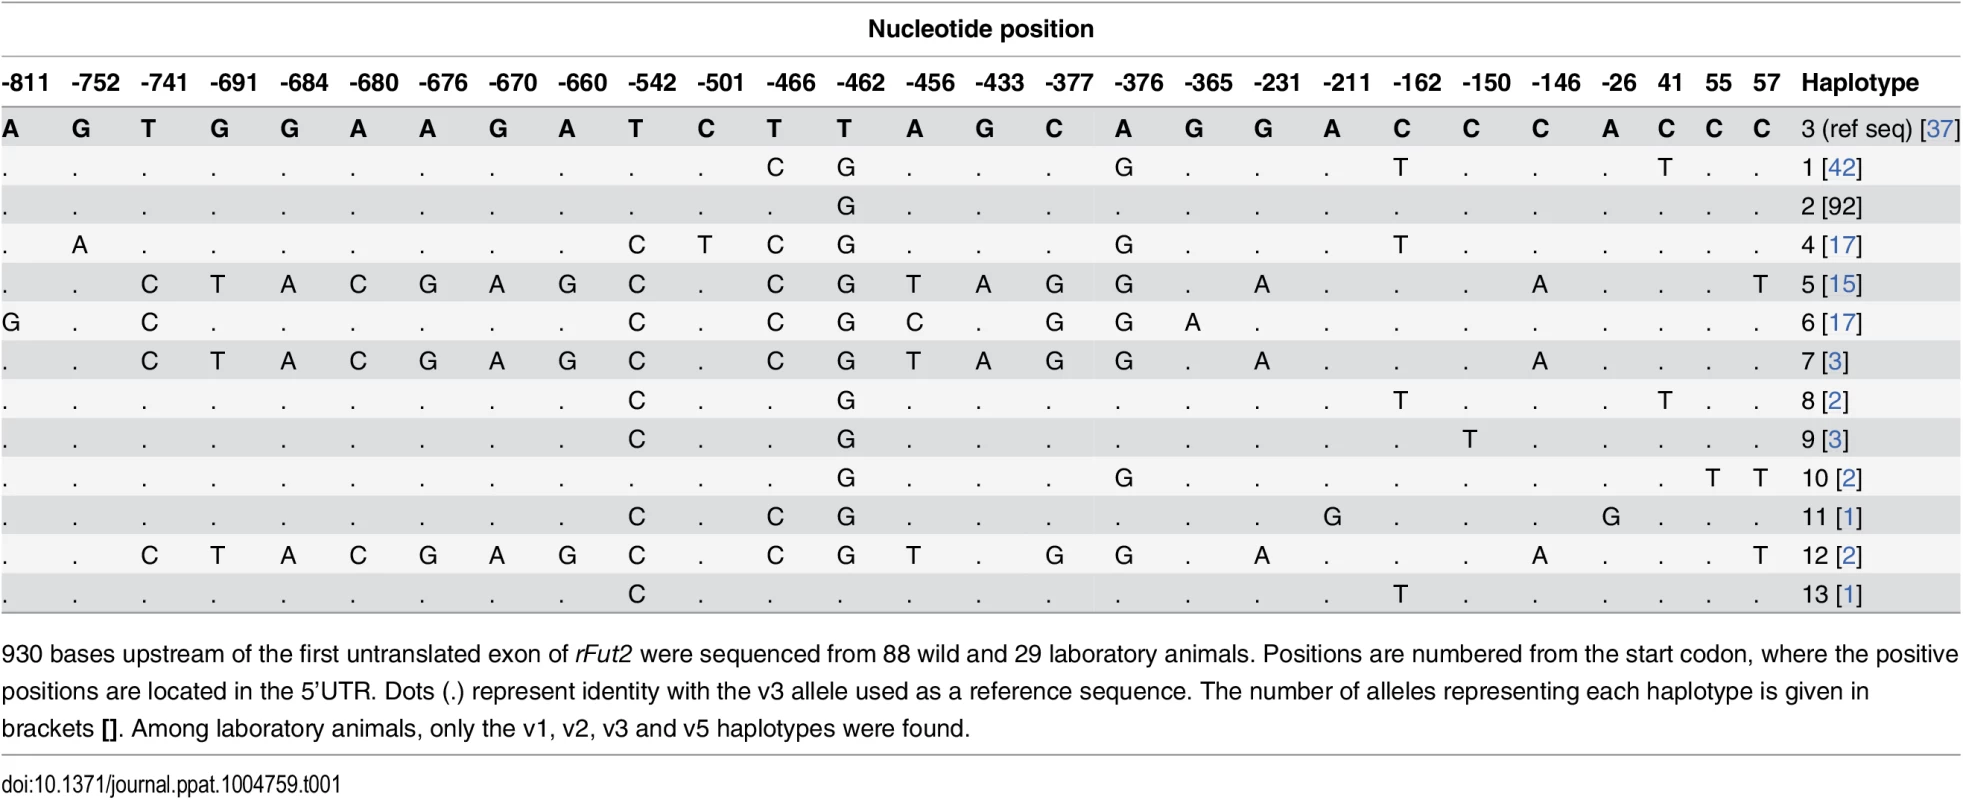 Nucleotide variation found in French wild and laboratory animals in the putative promoter region of rFut2 and inferred haplotypes.